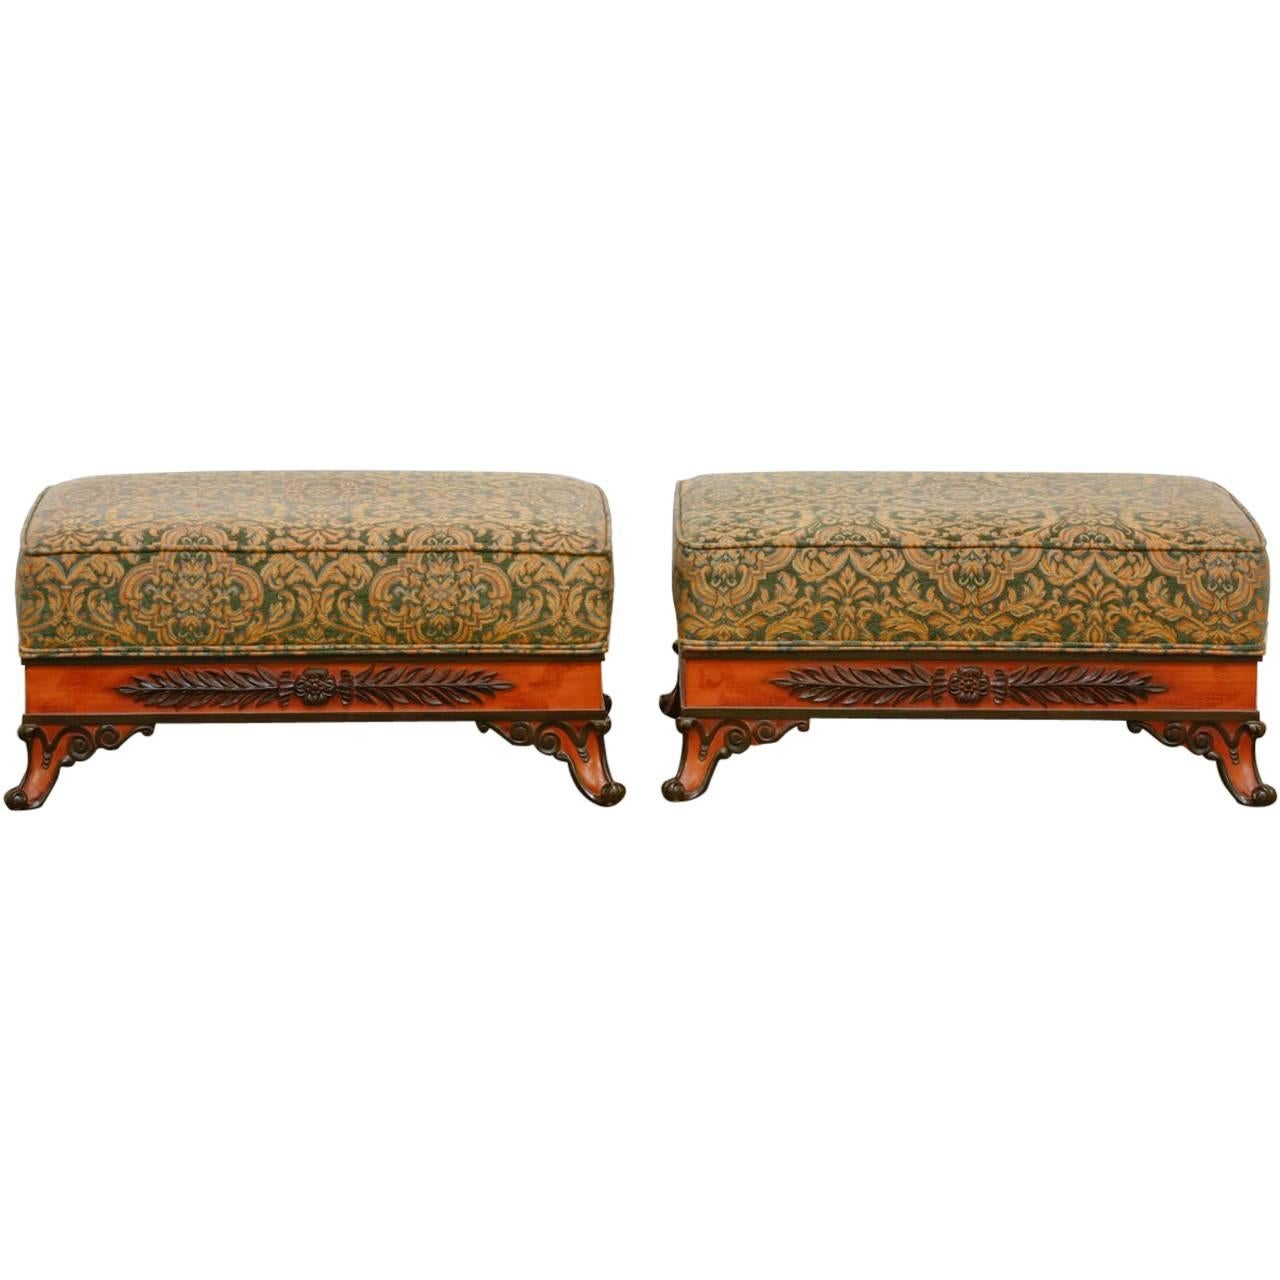 Pair of Italian Carved and Upholstered Ottoman Benches